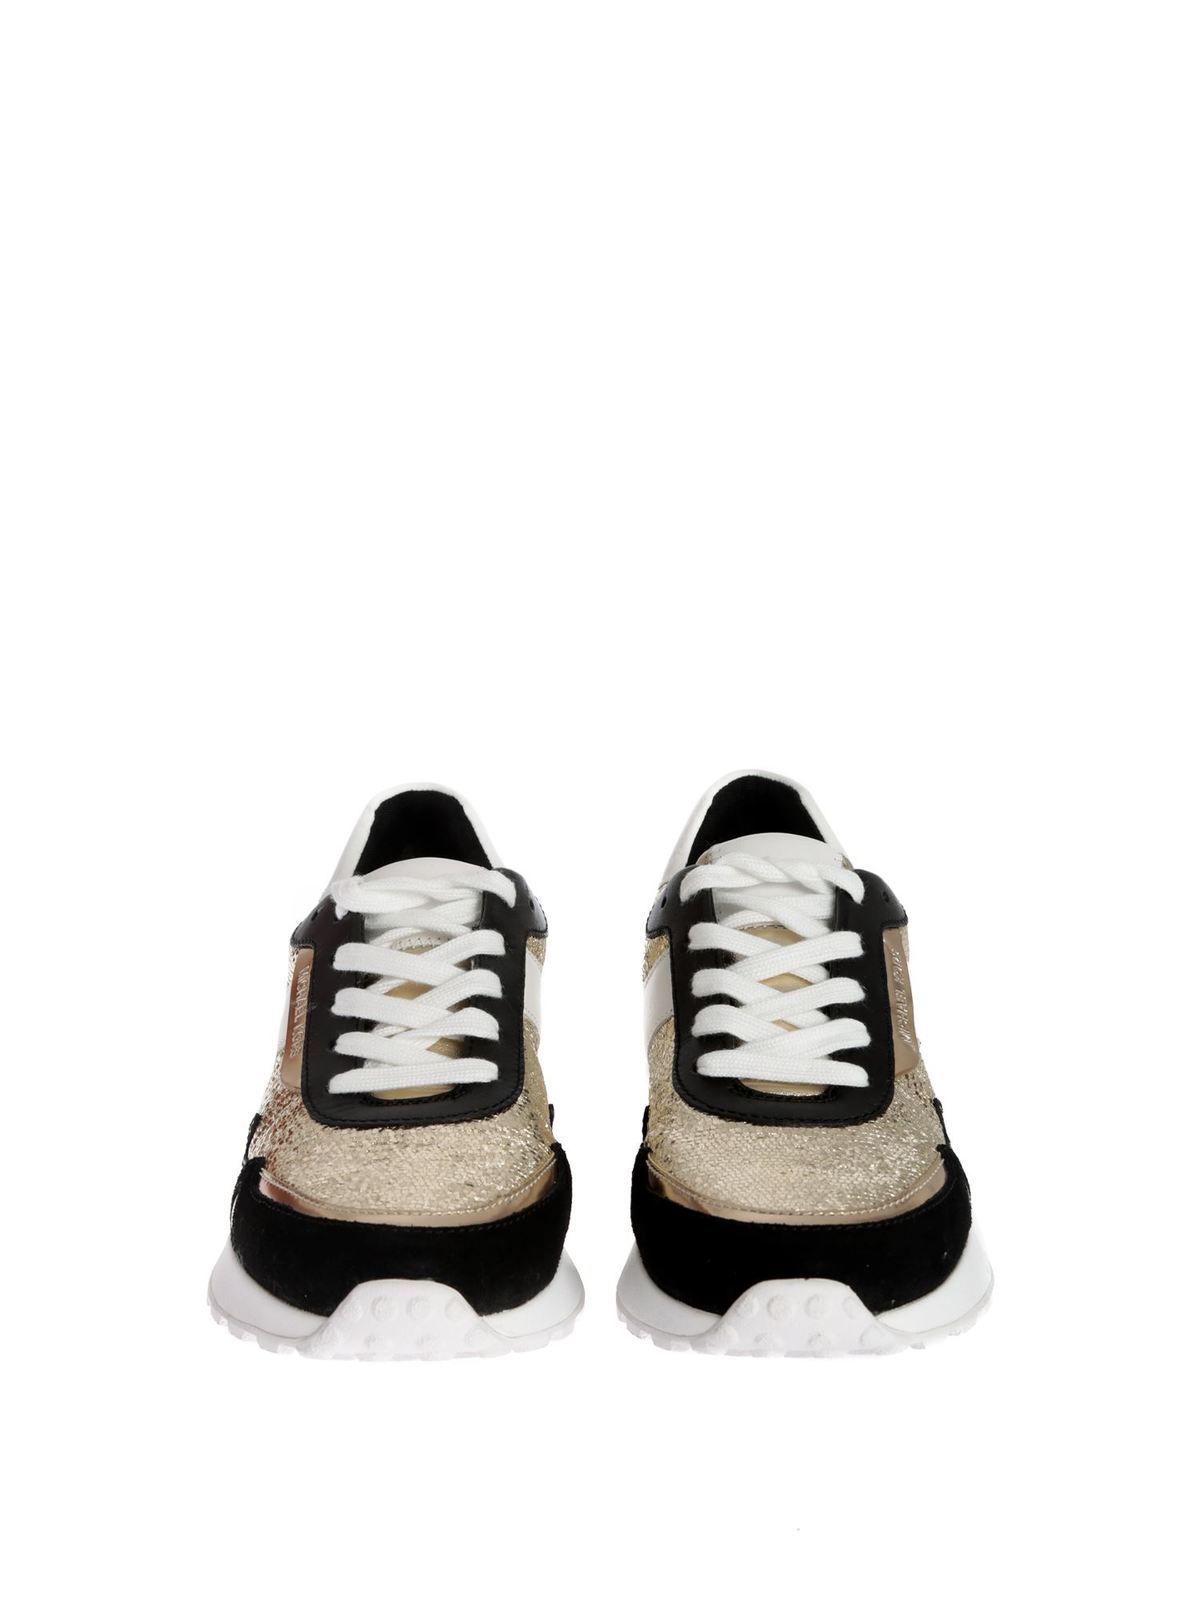 Fabel Uitscheiden olifant Trainers Michael Kors - Monroe sneakers in metallic leather and suede -  43F9MOFS1MPLGOLDBLK